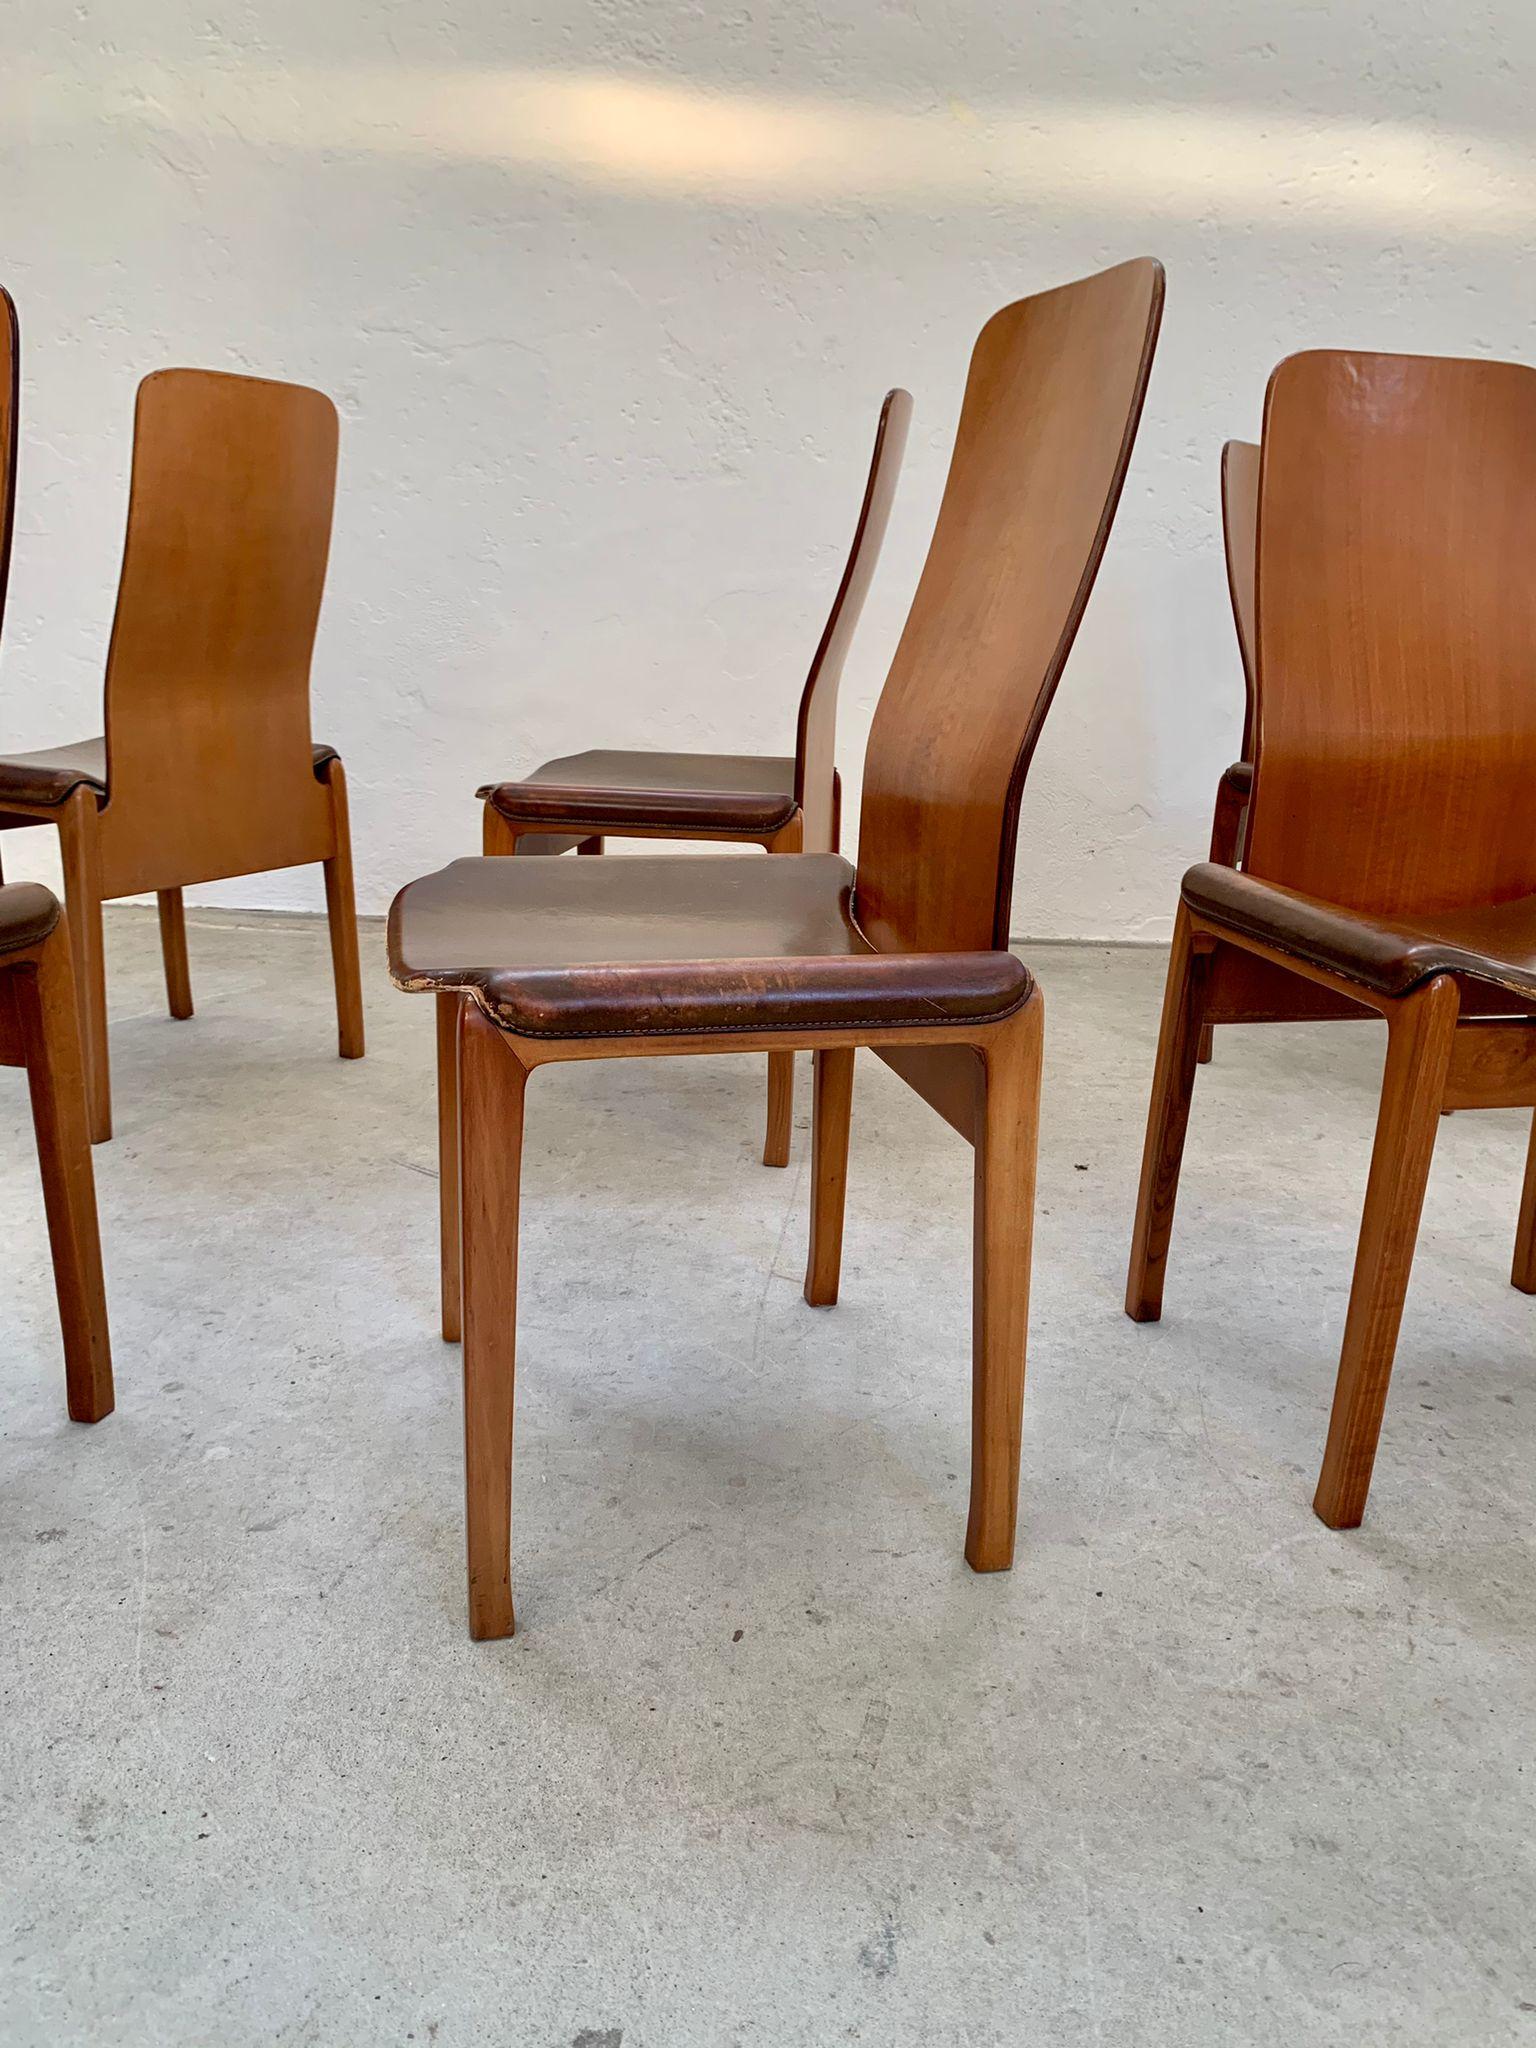 Italian Set of Fiorenza chairs in wood and leather by Tito Agnoli for Molteni, 1968